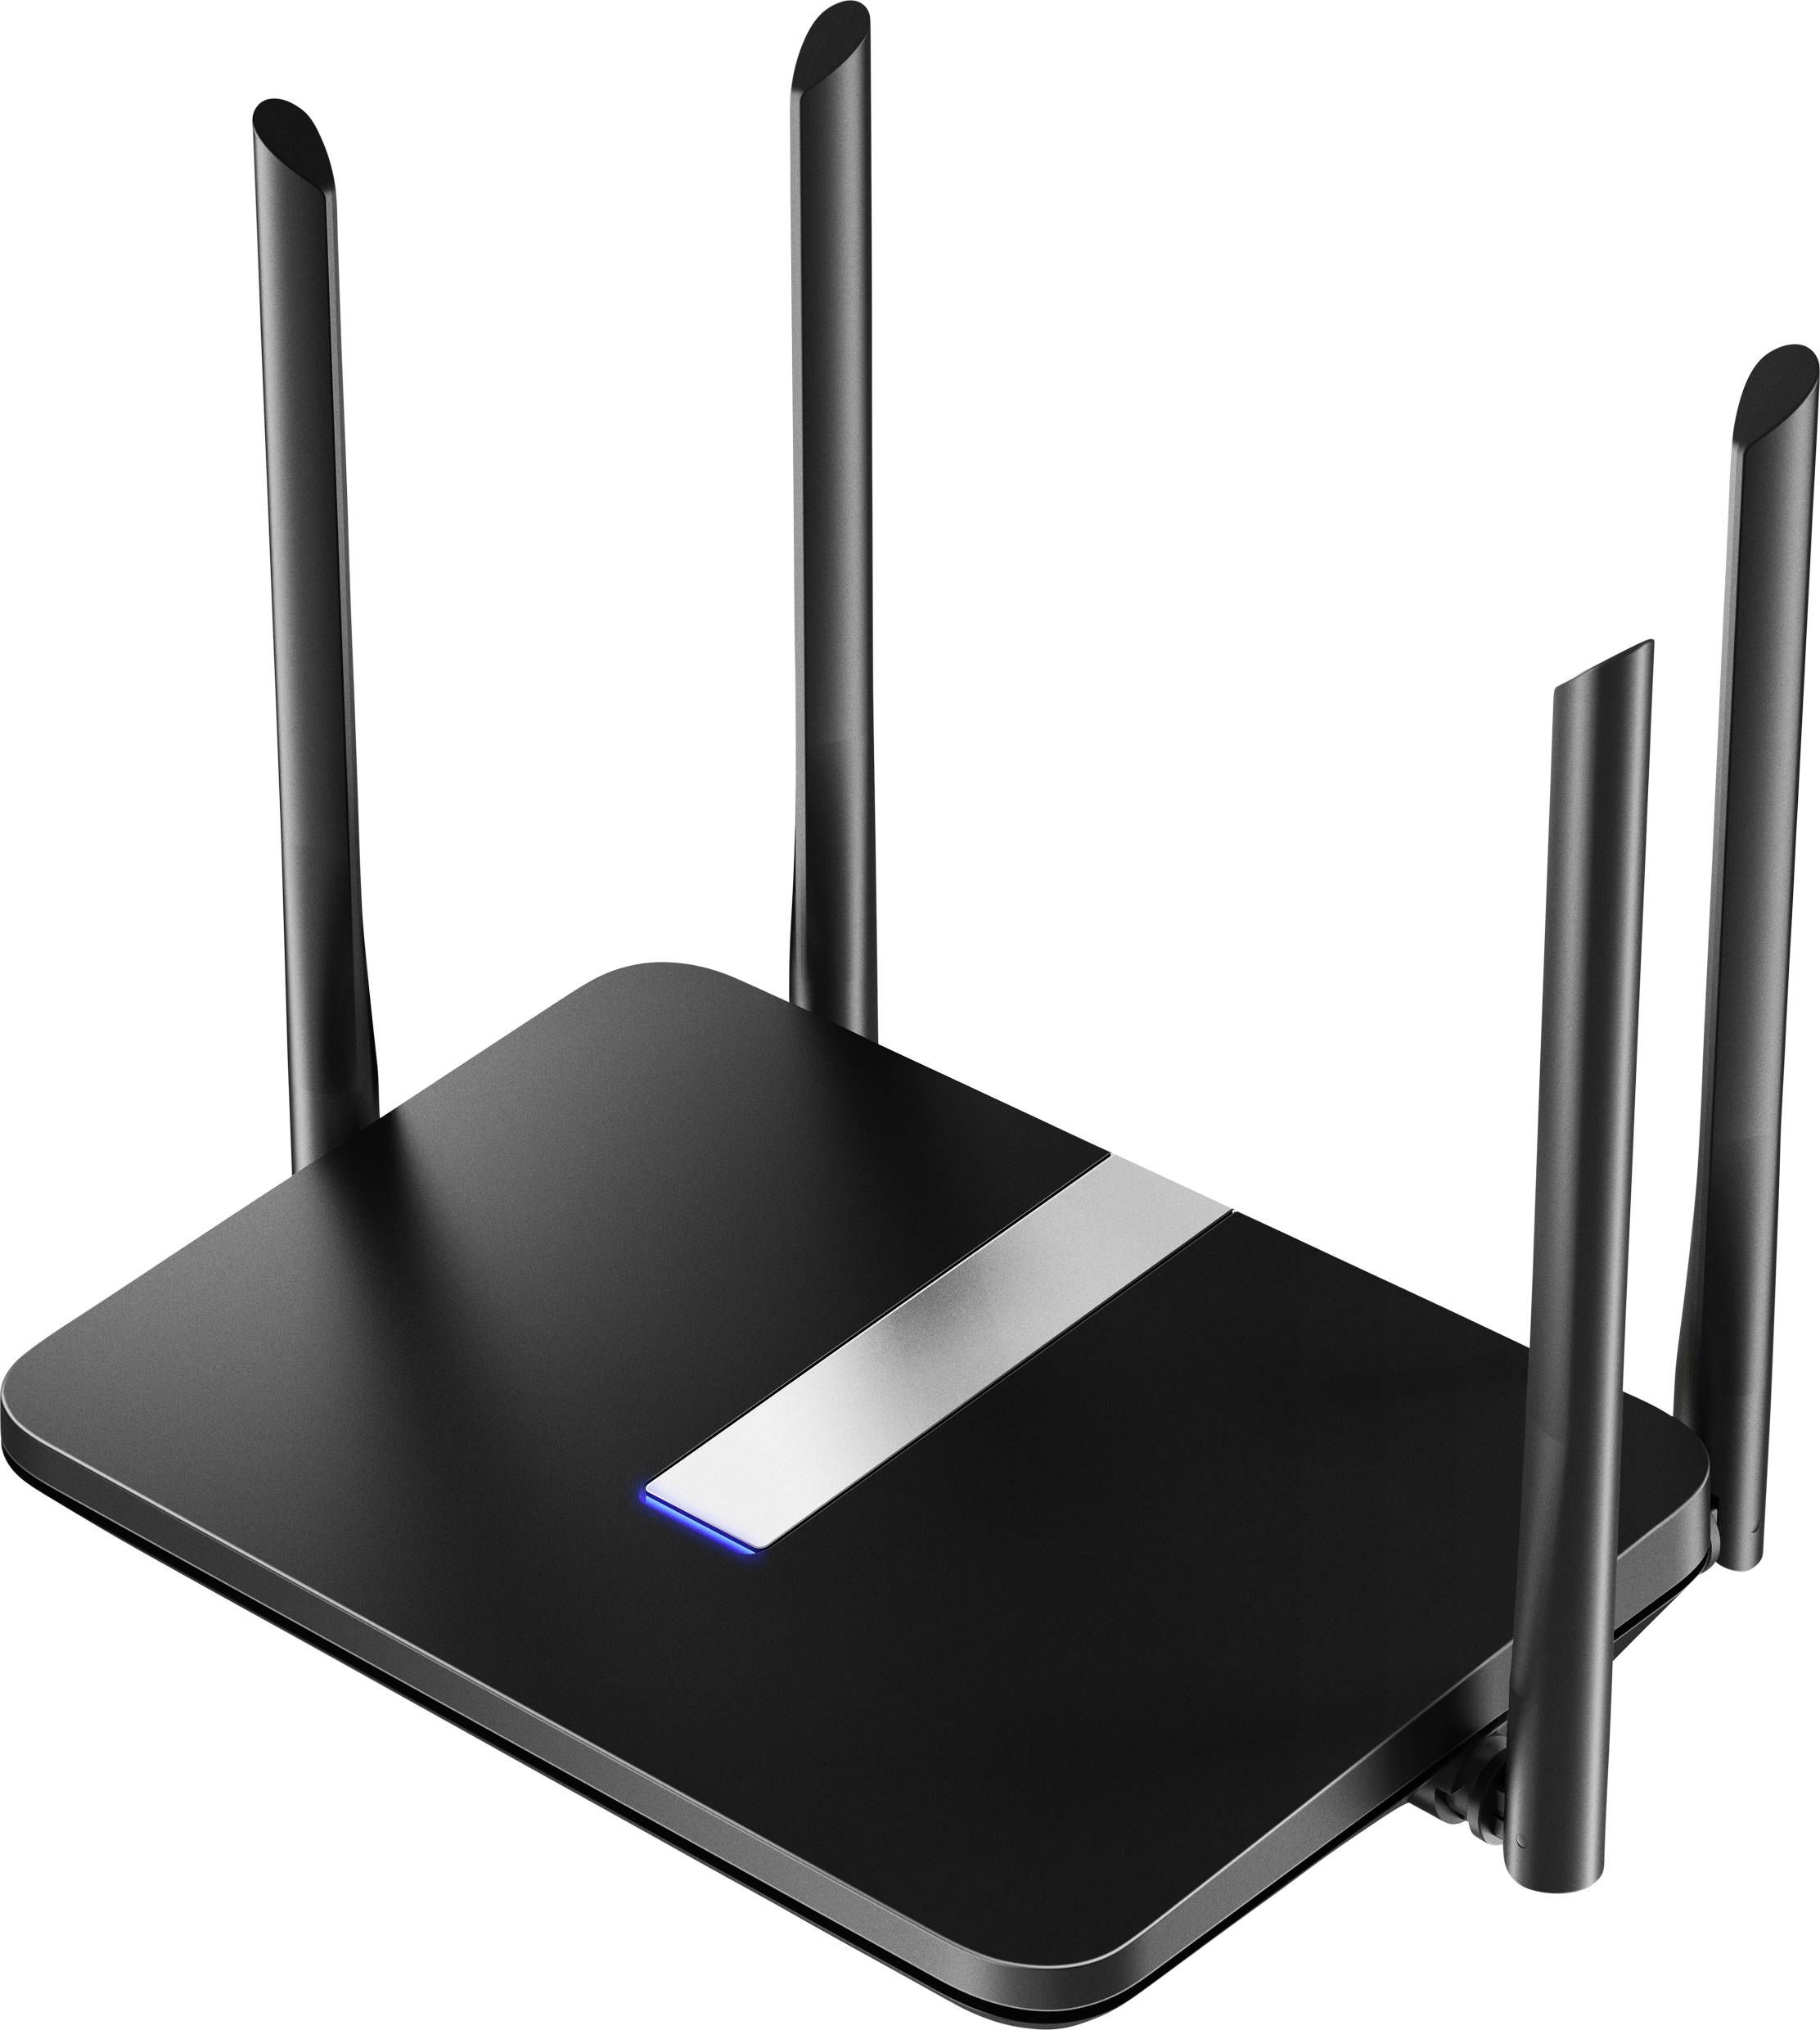 oog smog langzaam cudy WR2100 WiFi-router 2.4 GHz, 5 GHz 2100 MB/s kopen ? Conrad Electronic